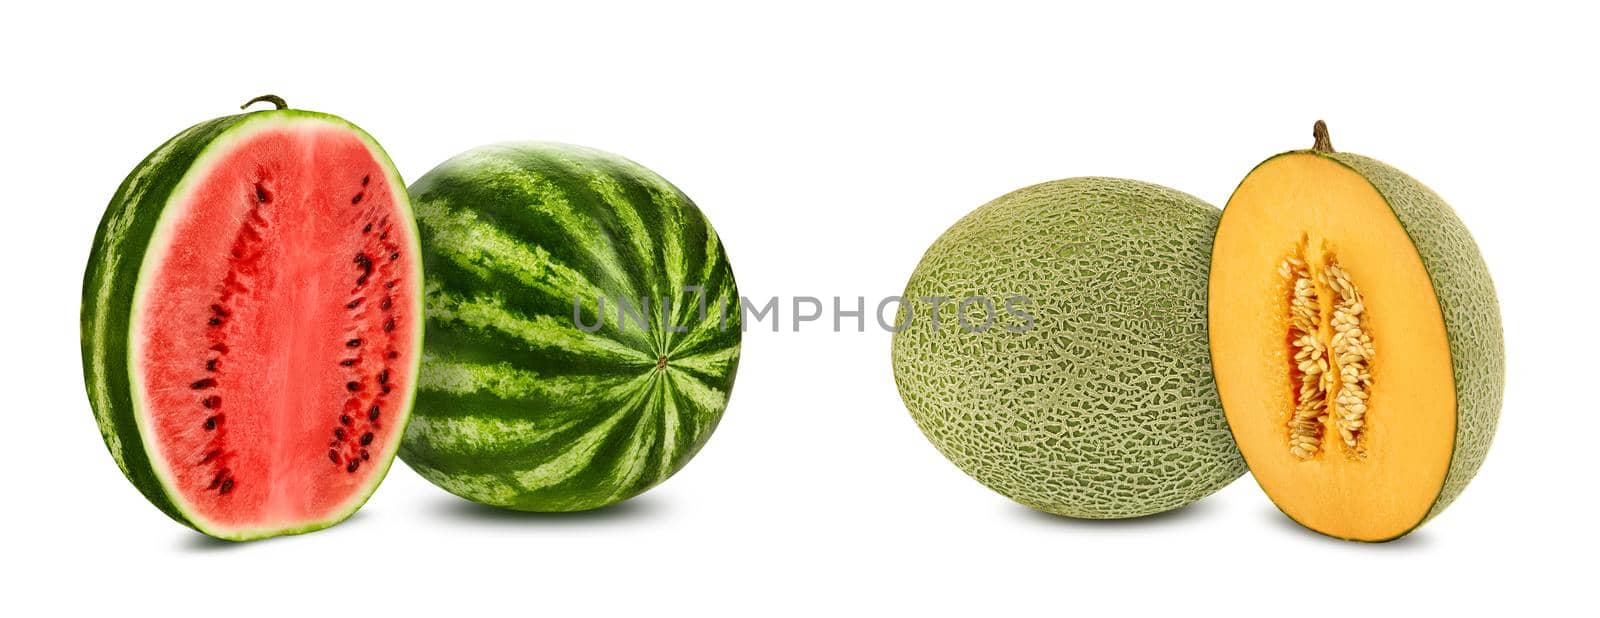 Green watermelon and cantaloupe melon with halves in cross-section, isolated on white, copy space. Juicy red and yellow flesh with seeds. Close-up. by nazarovsergey